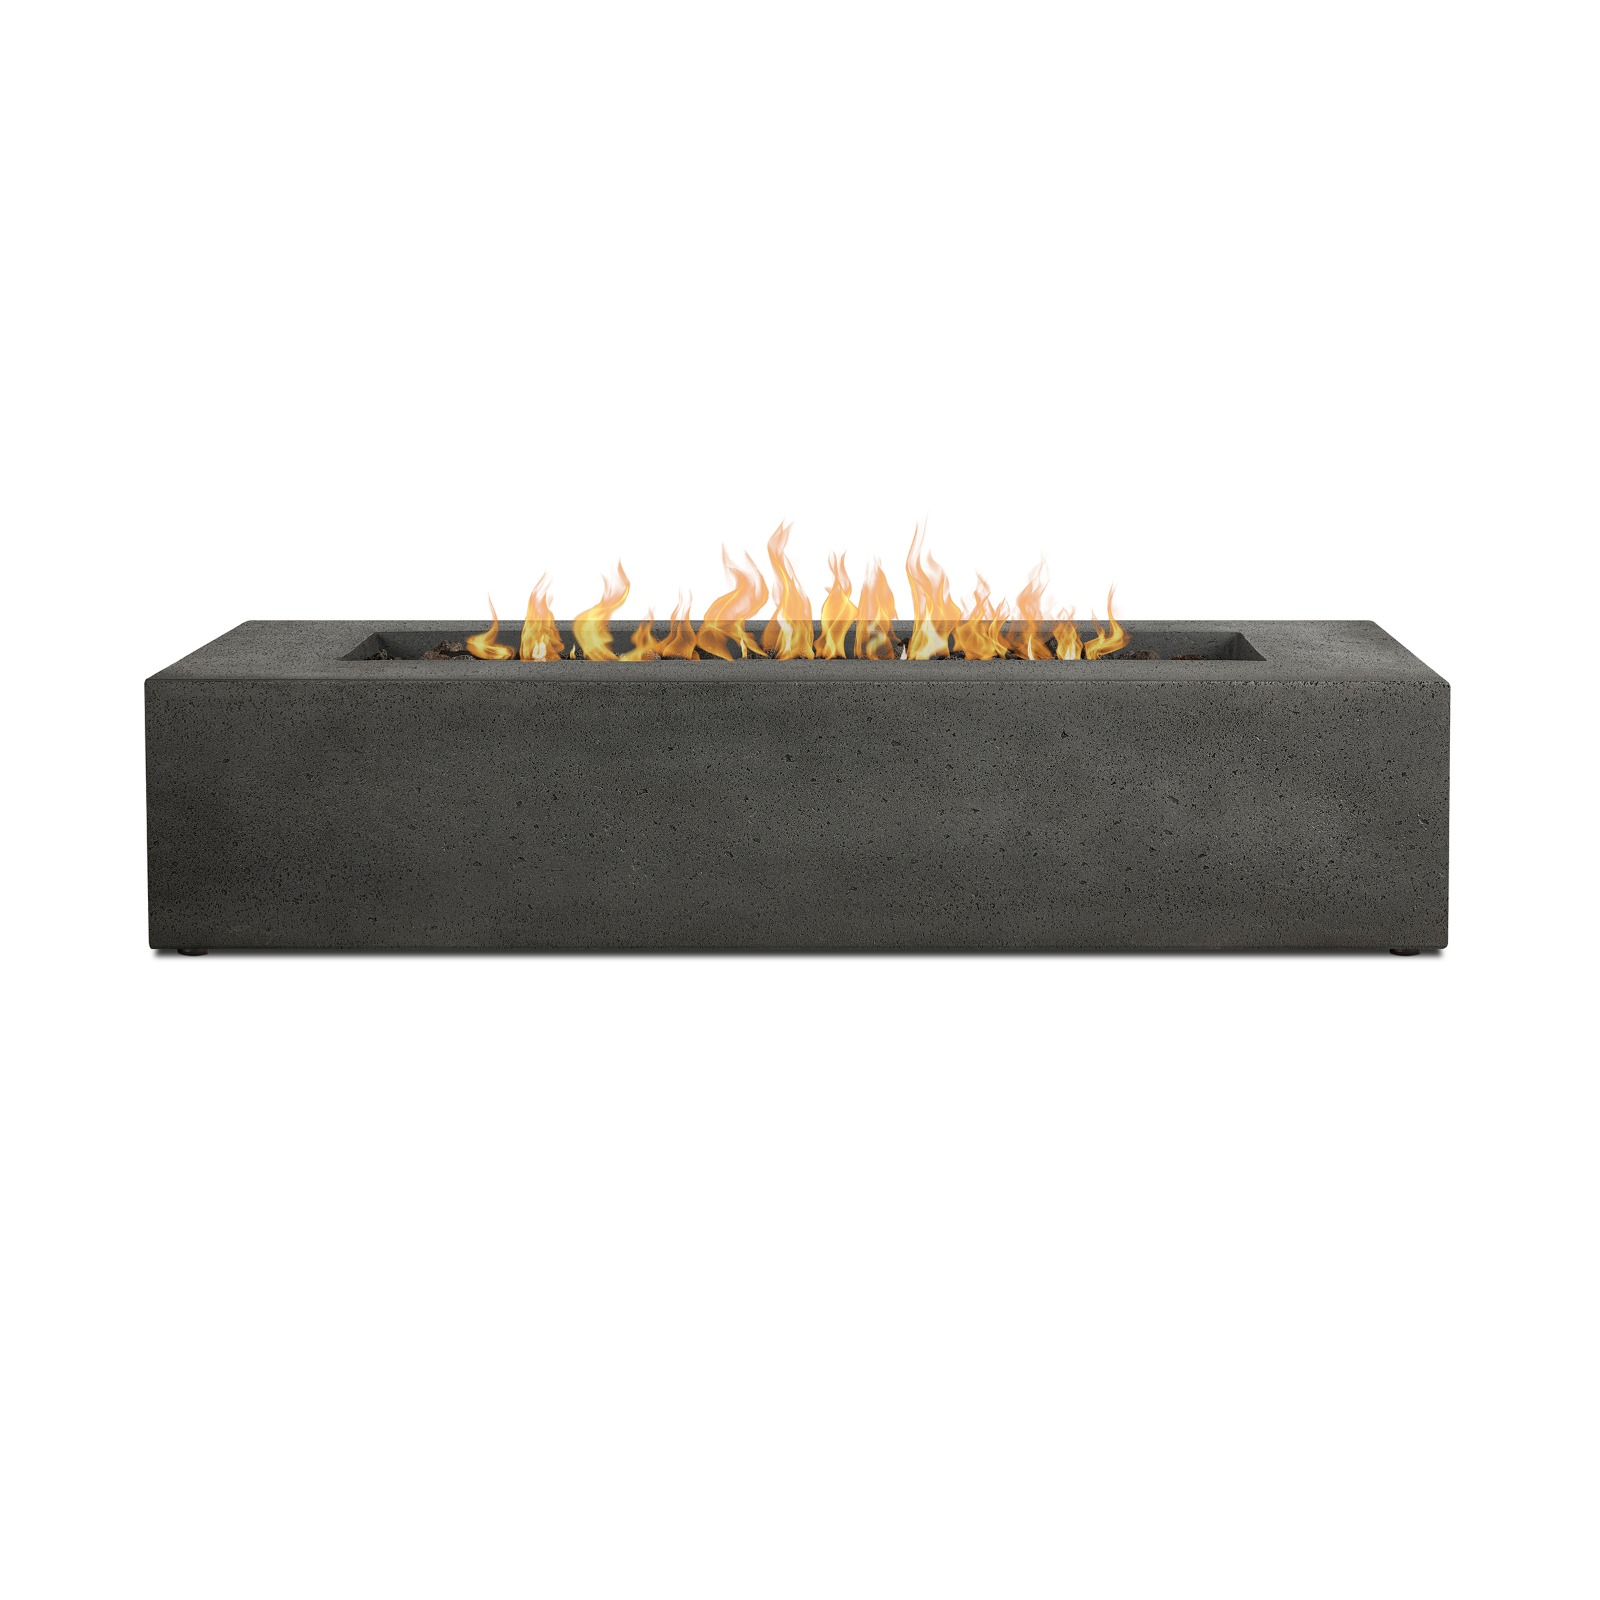 La Valle 56" Rectangle GFRC Outdoor Natural Gas or Propane Fire Pit Fireplace Fire Table for Backyard or Patio